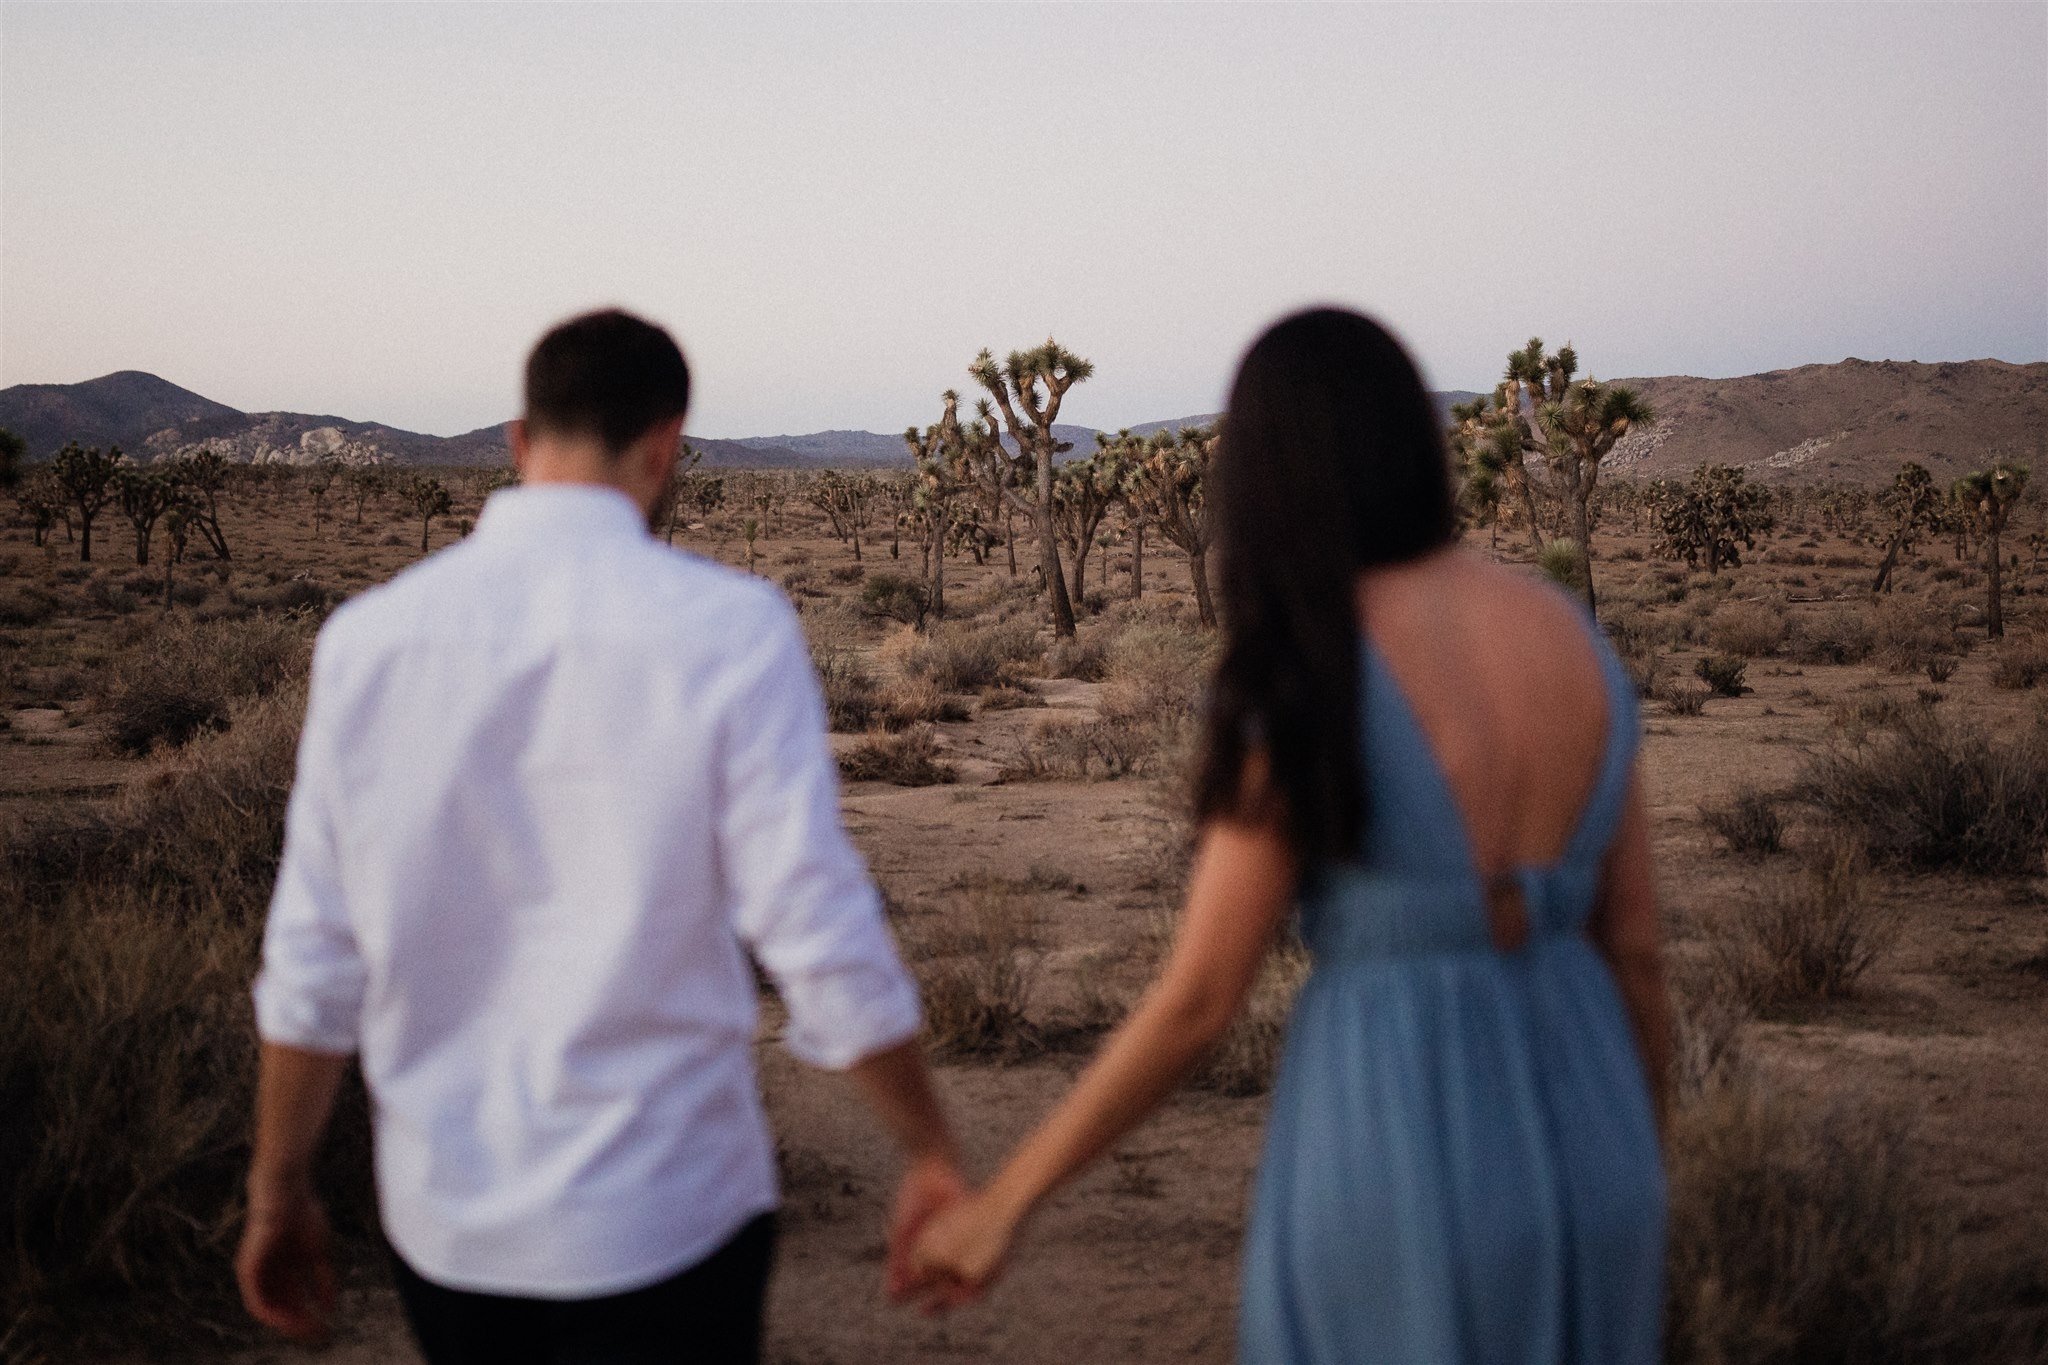 Joshua Tree Couples Session Surprise Proposal - Will Khoury Photography_07.jpg